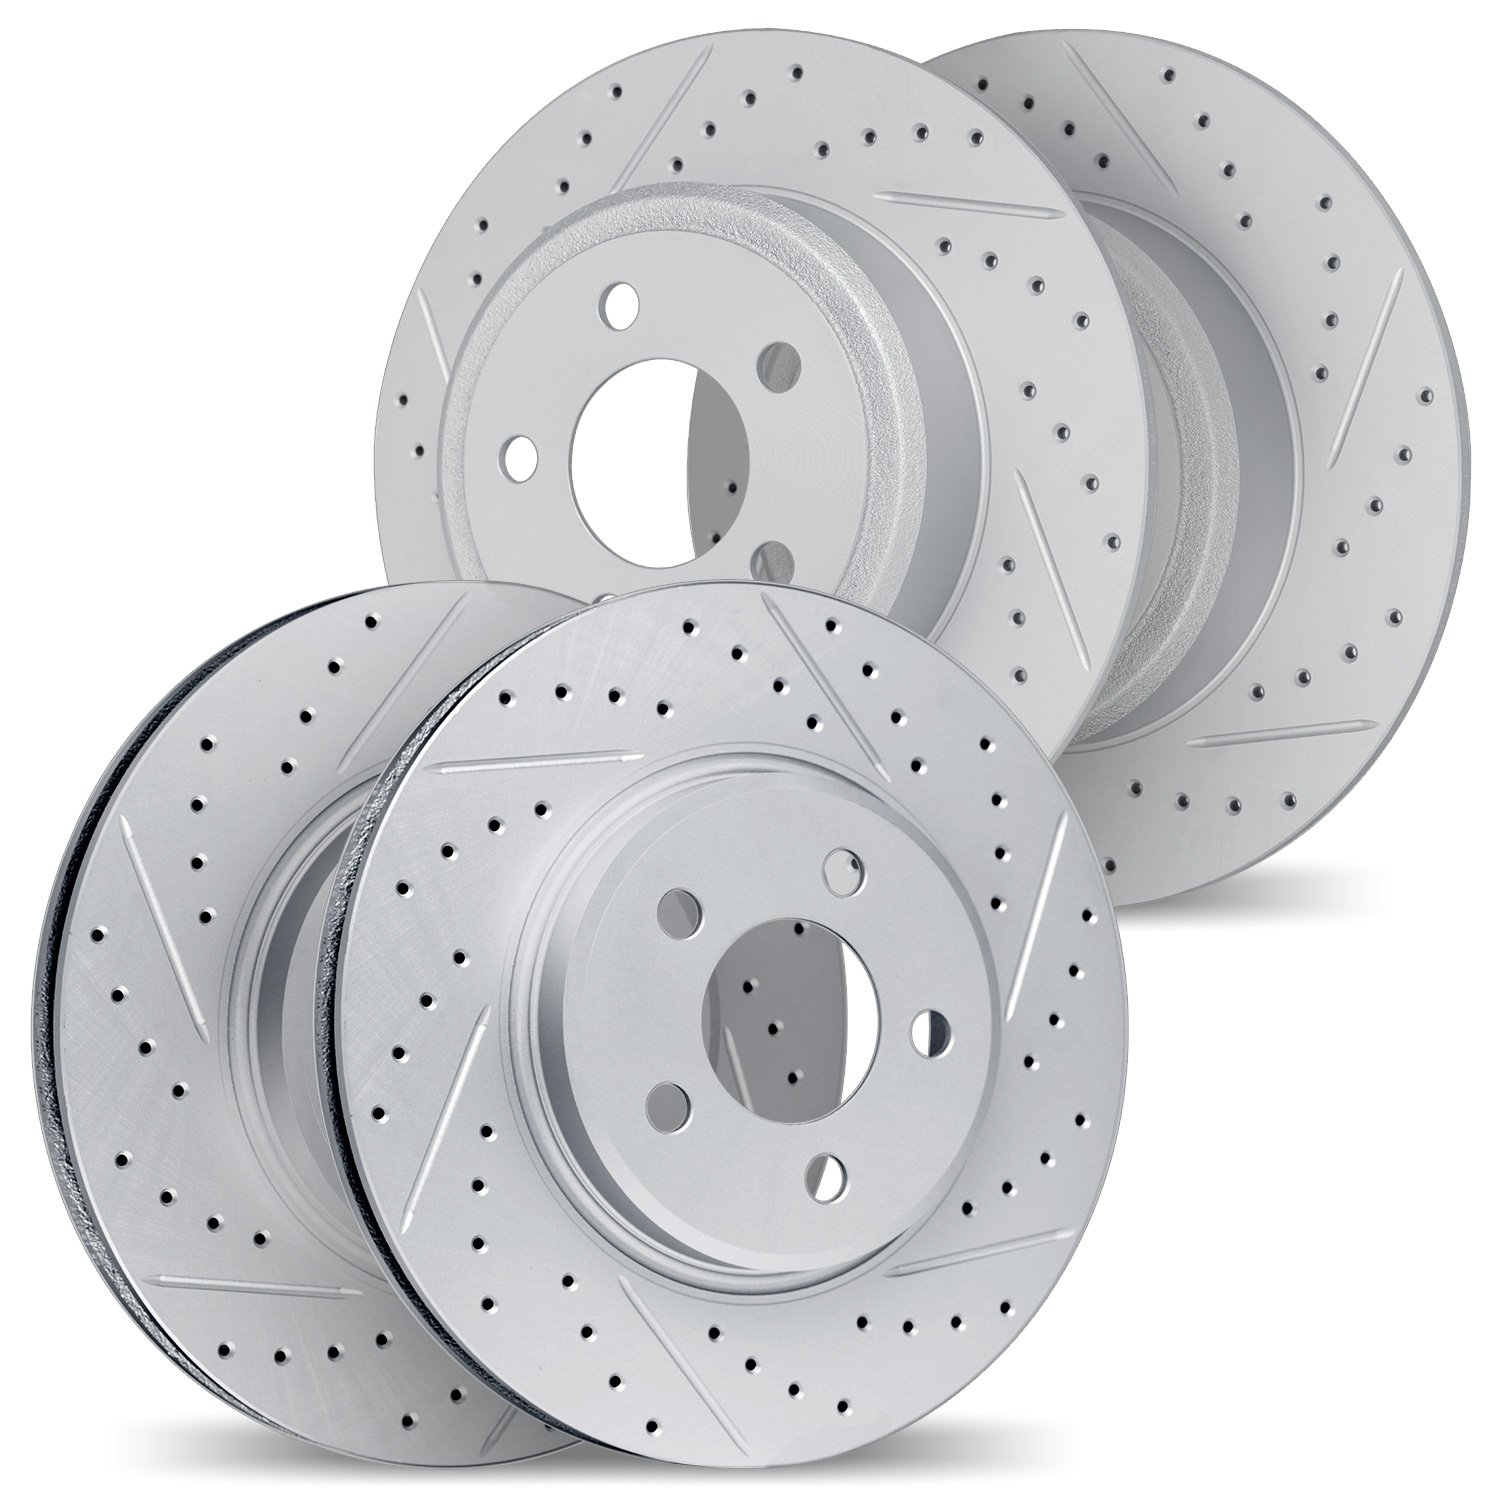 2004-45024 Geoperformance Drilled/Slotted Brake Rotors, 2011-2018 GM, Position: Front and Rear